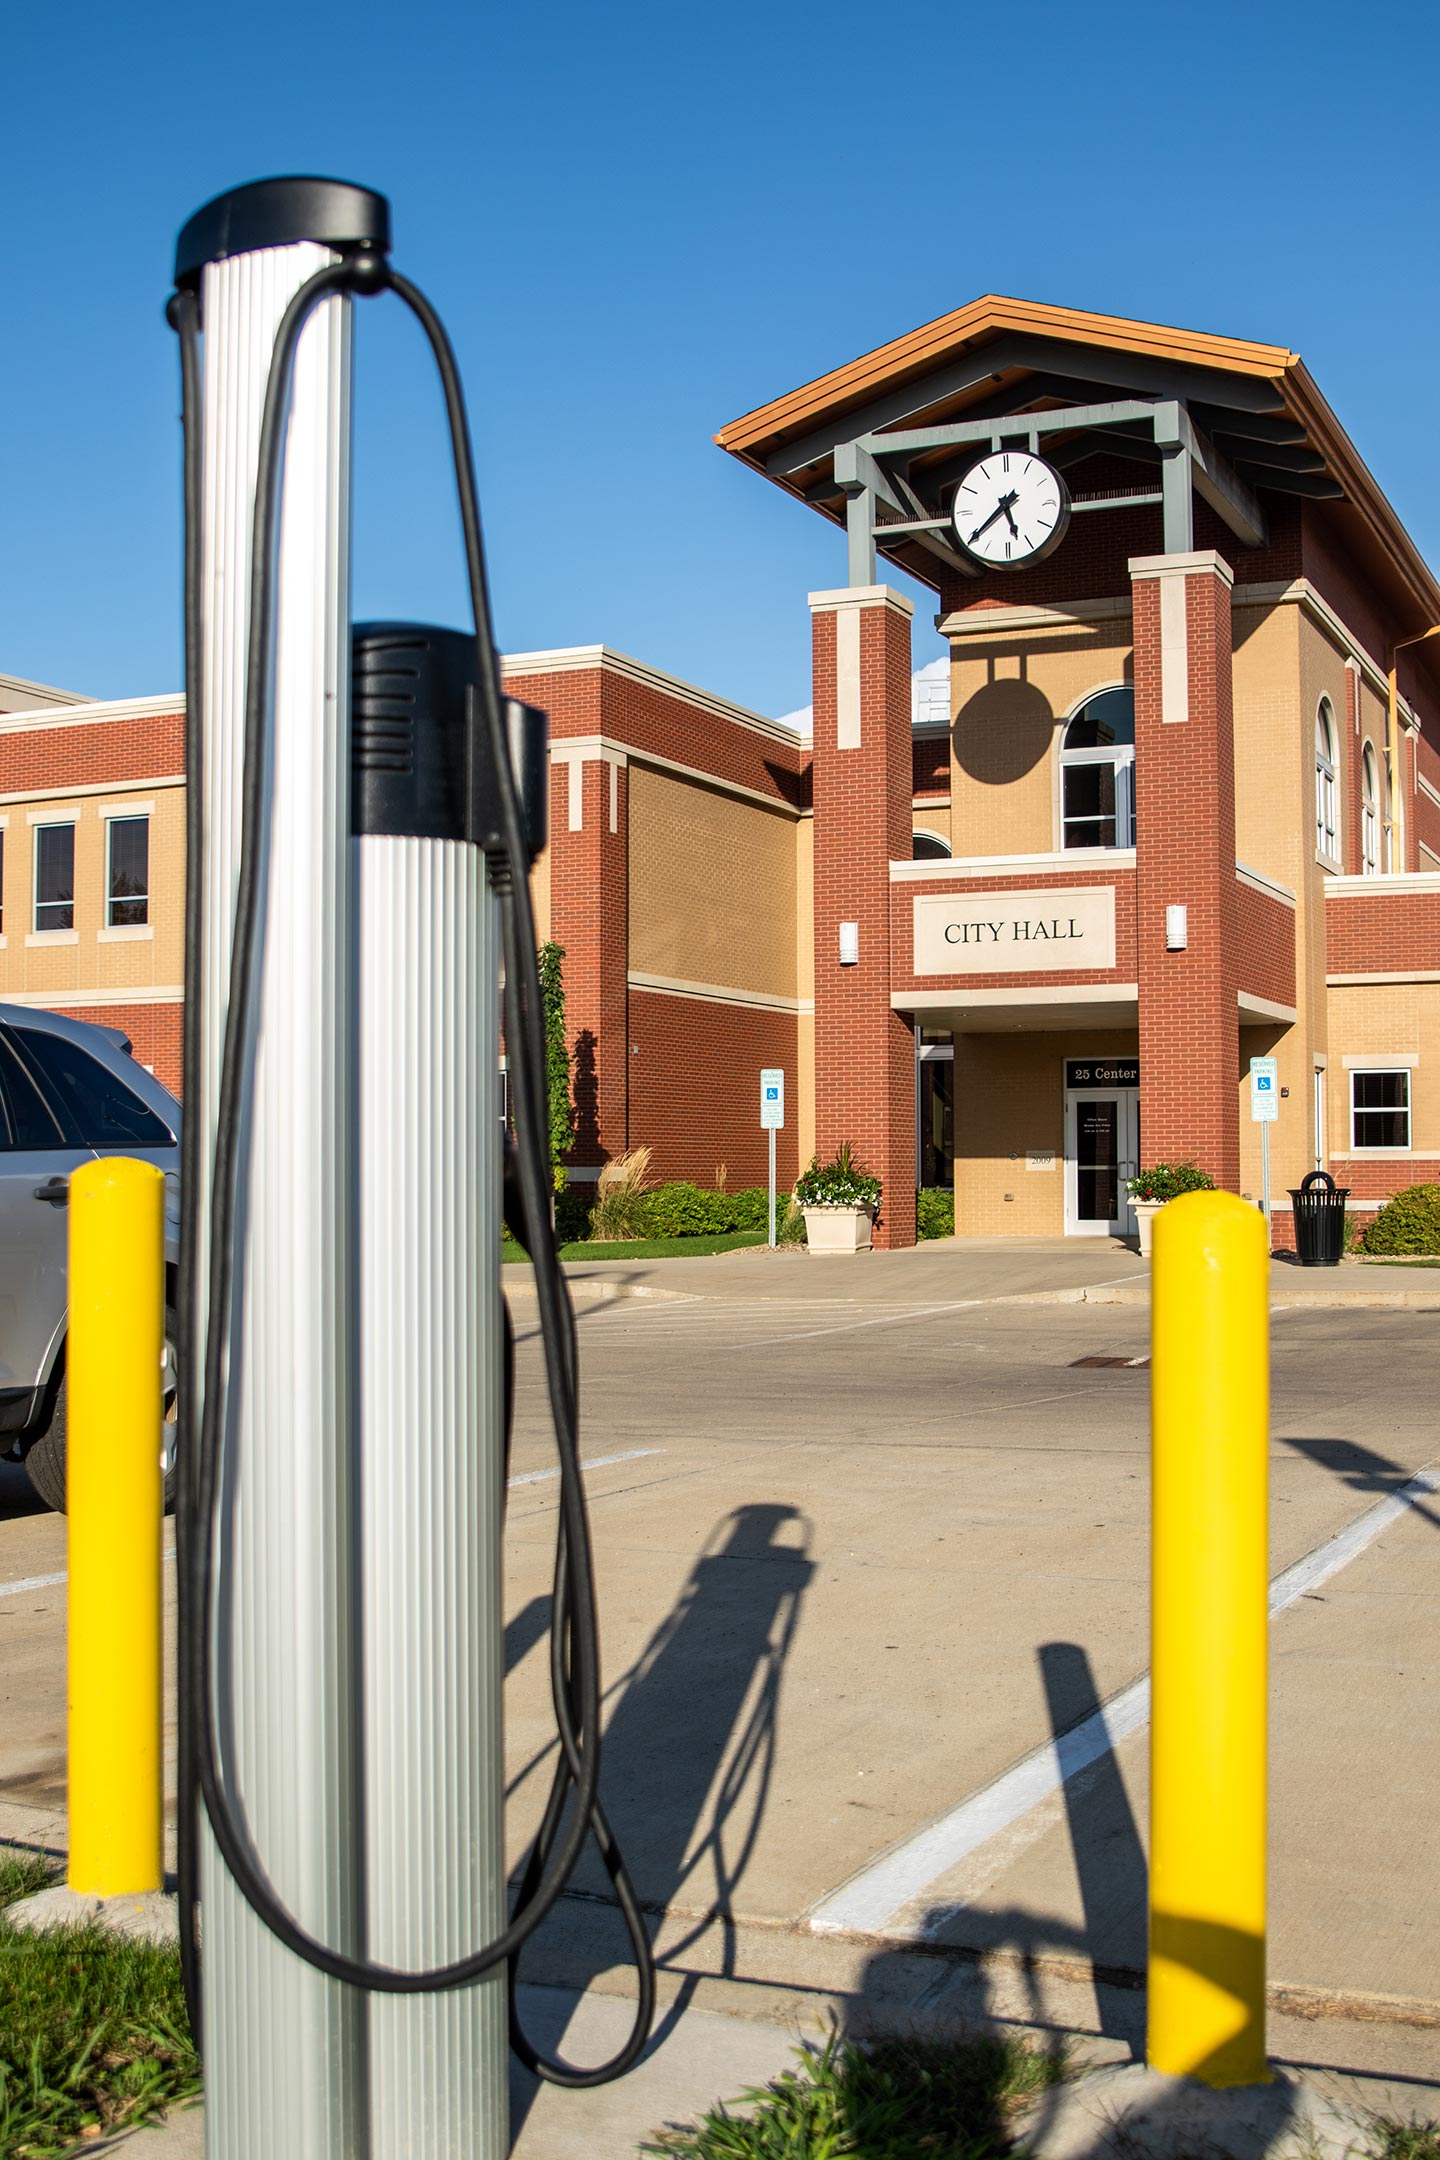 ‘Far and few between’: Vermillion’s lone car charging station seeing light use